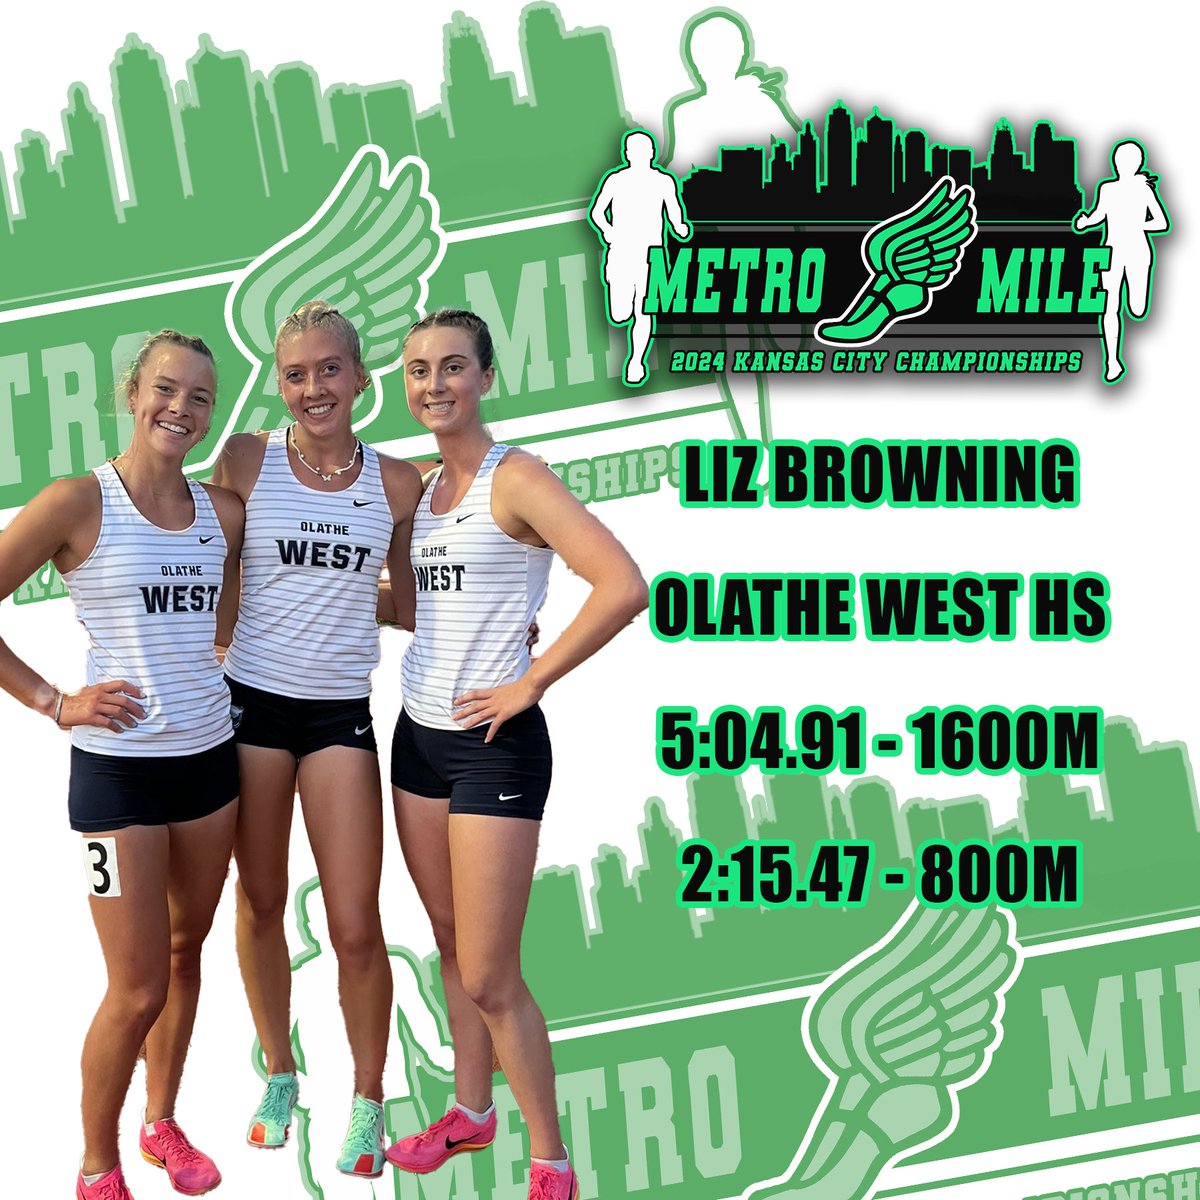 Commitment Alert! Liz Browning of Olathe West is joining us on June 6th! Liz had an amazing season finishing with a 3rd place 800M and 5th place 1600M at State! Liz has PR's of 5:04 and 2:15! @OWTracknField @owlxc @kansasrunning @KCarbajo